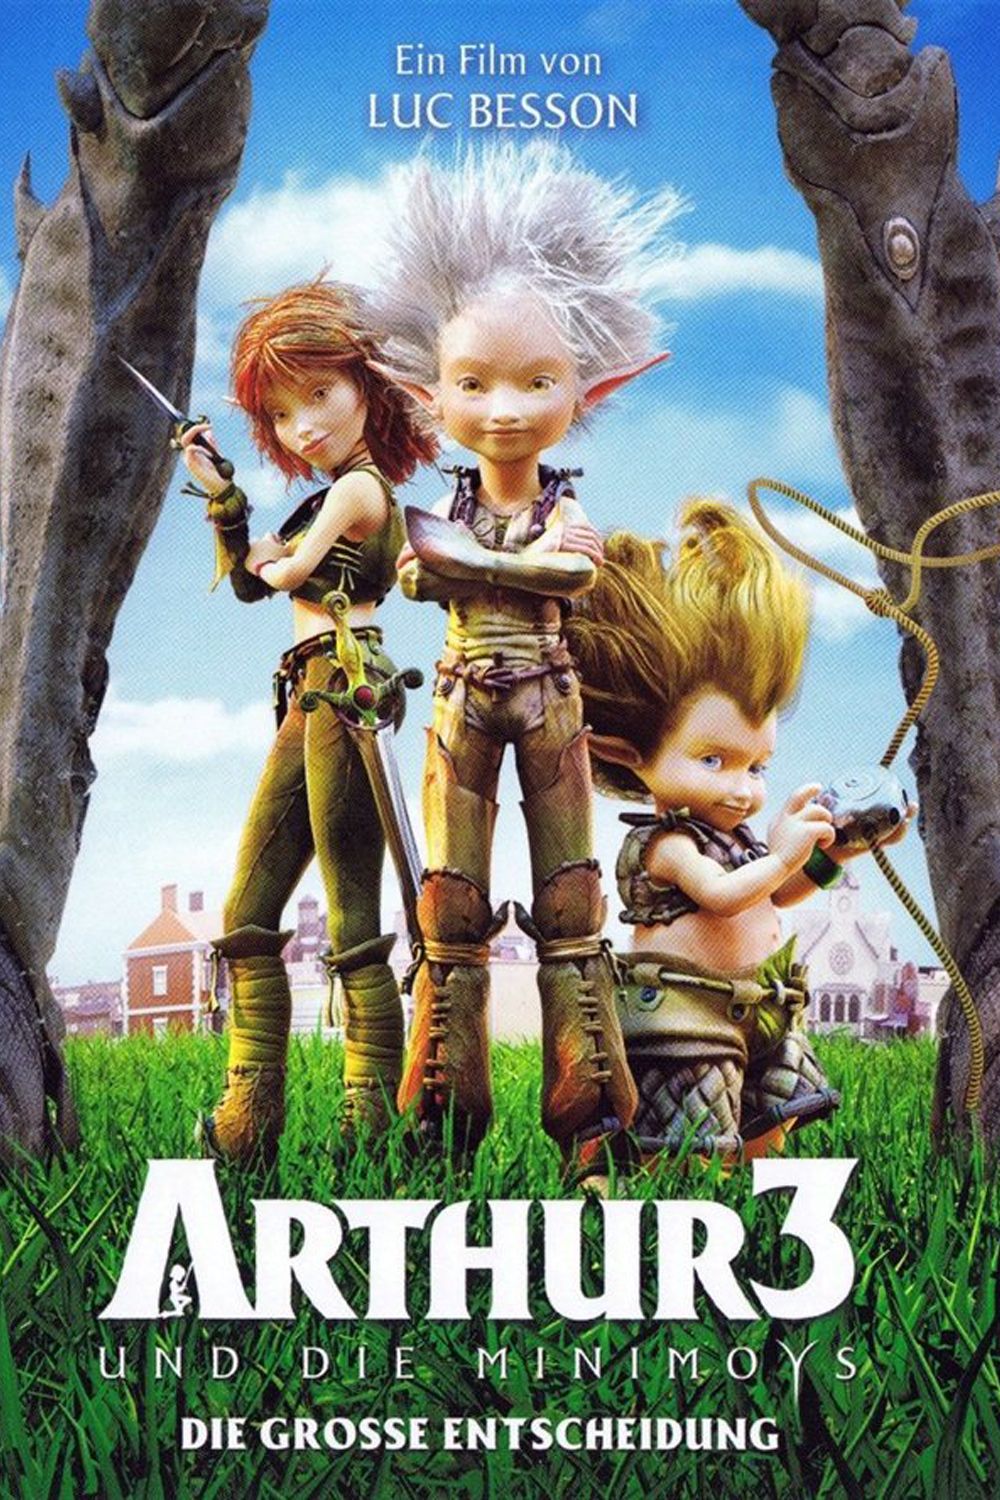 Arthur 3: The War of the Two Worlds (2010)